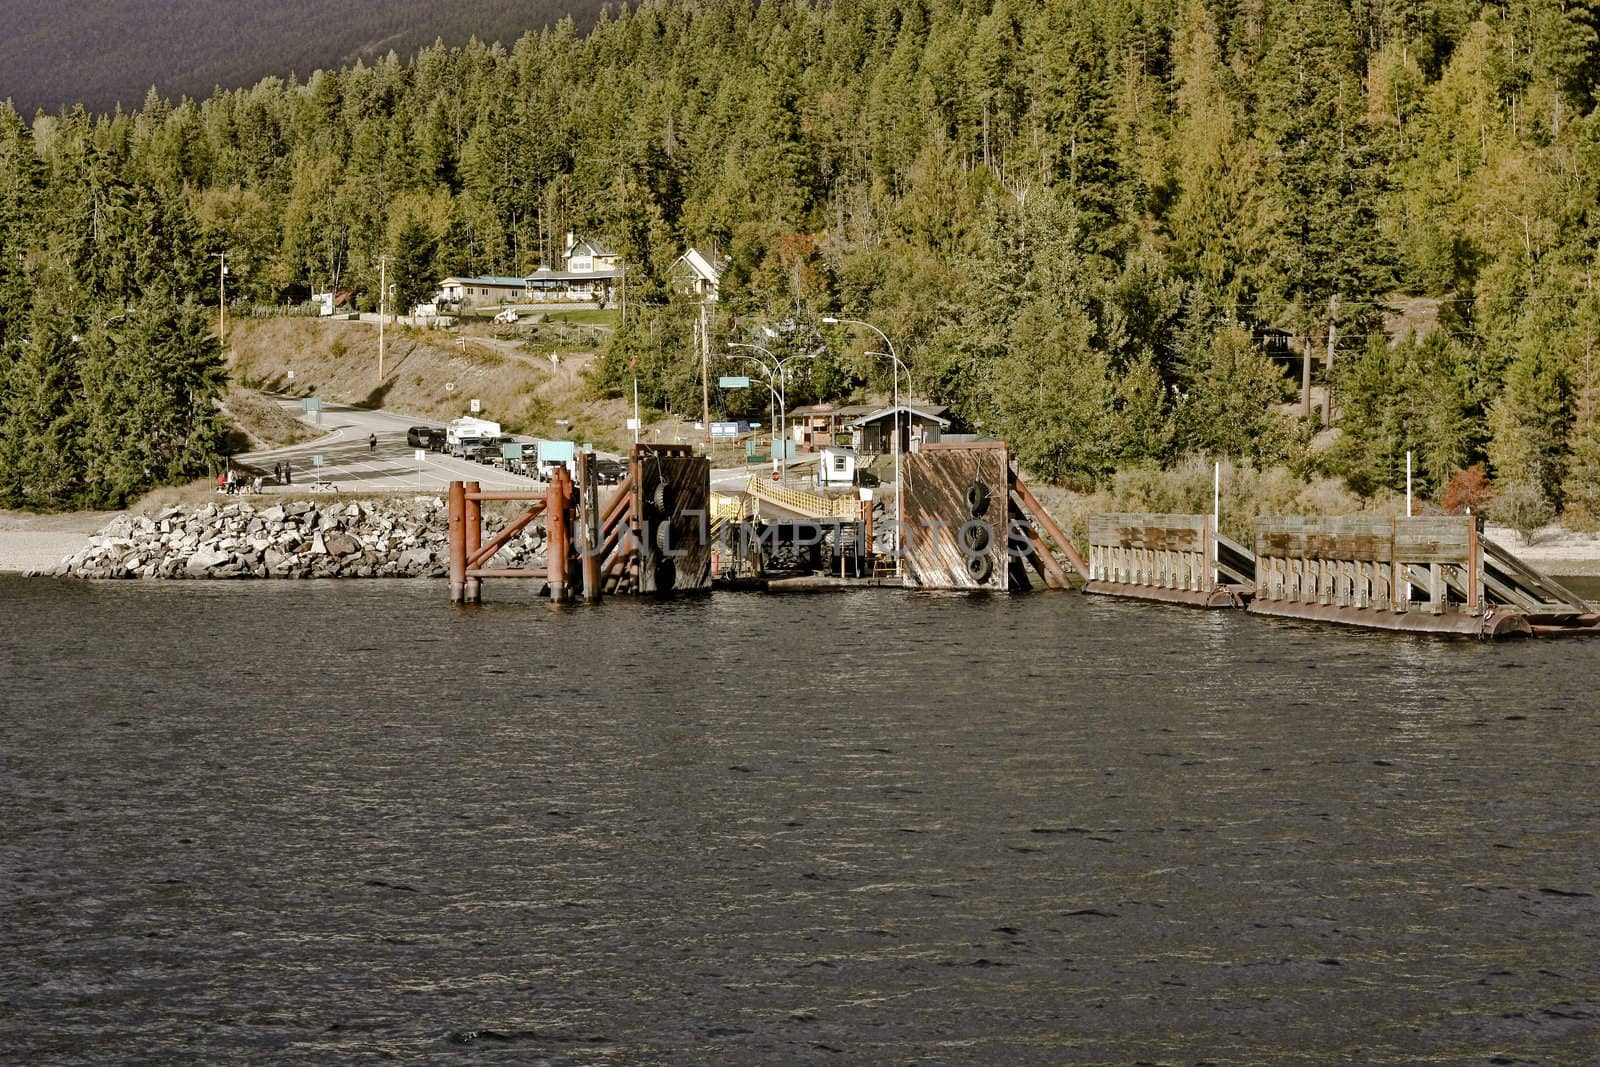 ferry landing stage in mountain lake